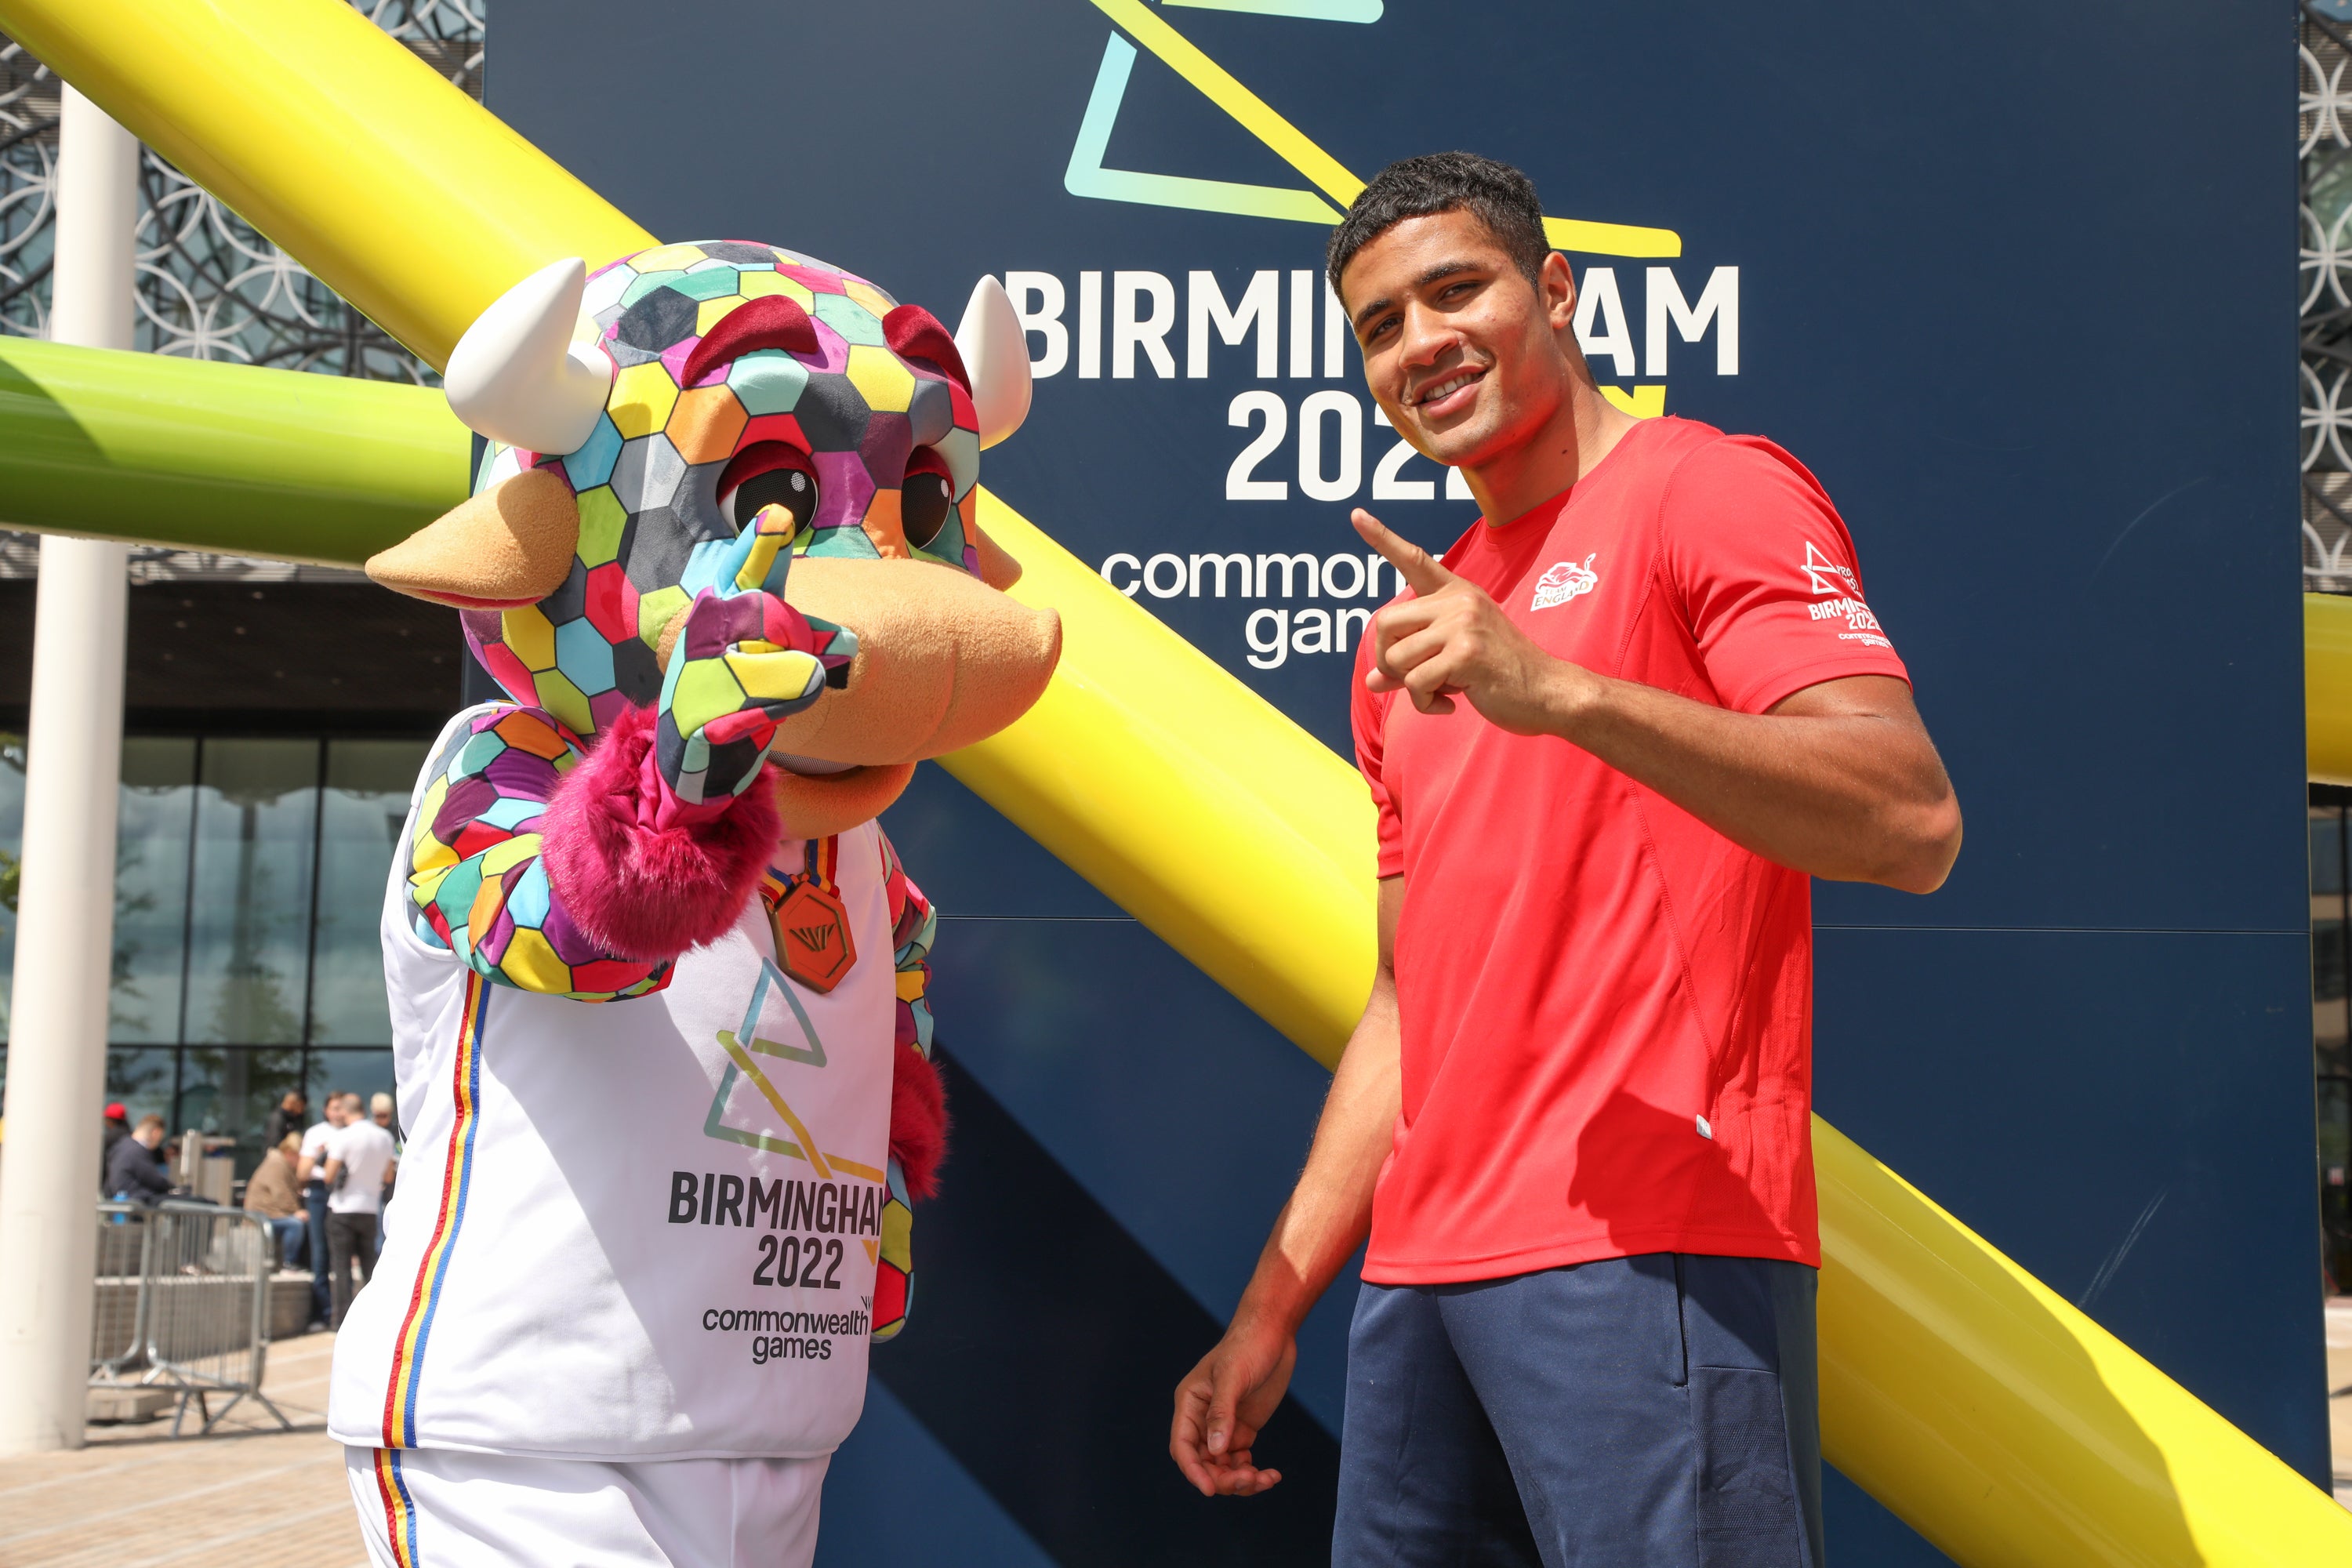 Birmingham is counting down to the Commonwealth Games next year